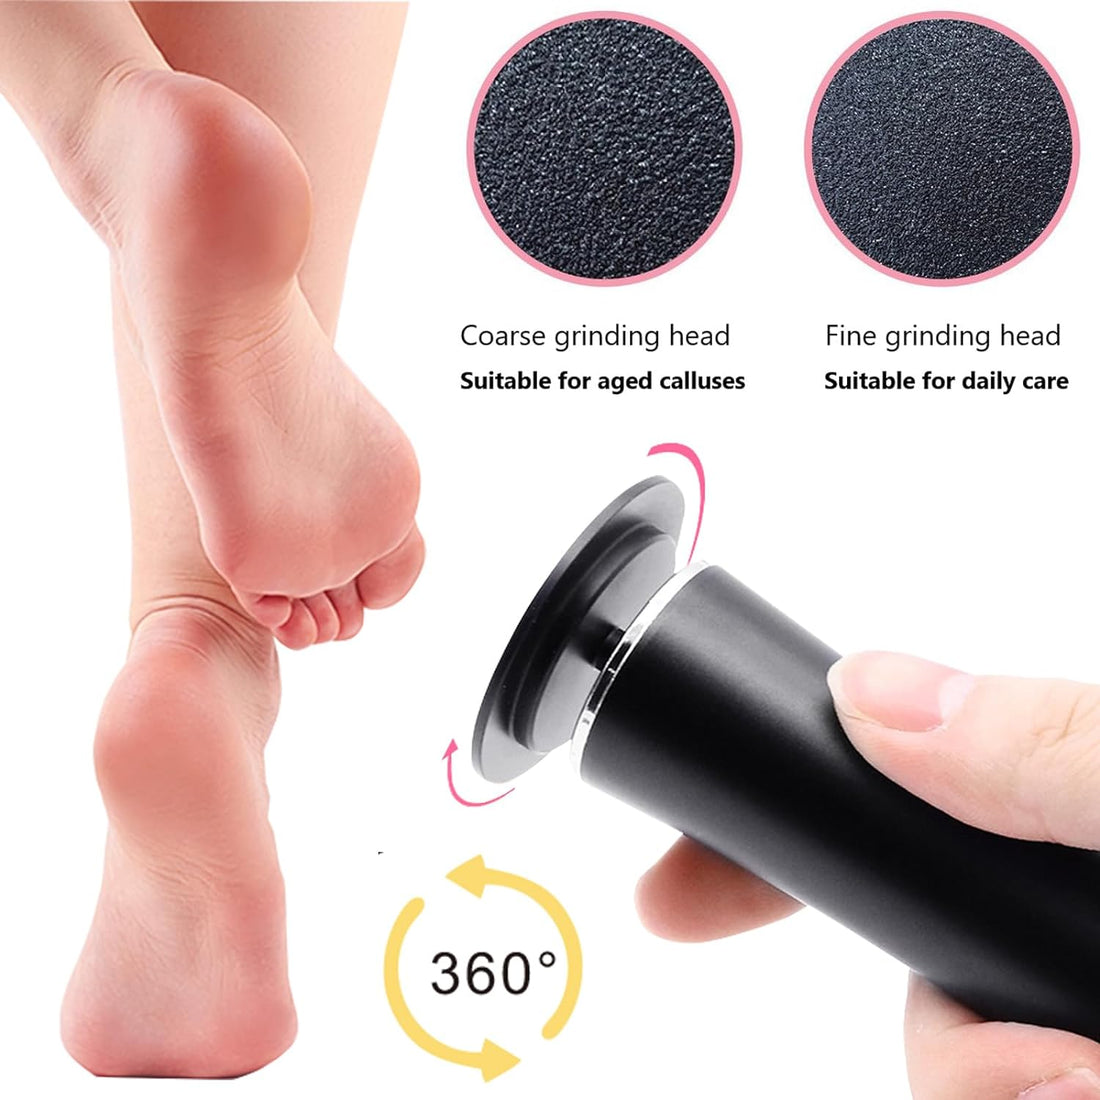 Electric Foot Callus Remover,LXIANGN Electronic Foot File Grinder with Speed Adjustable and 60pcs Replacement Sandpaper Discs,Pedicure Foot File Sander for Men Women Dead Cracked Hard Skin Calluses